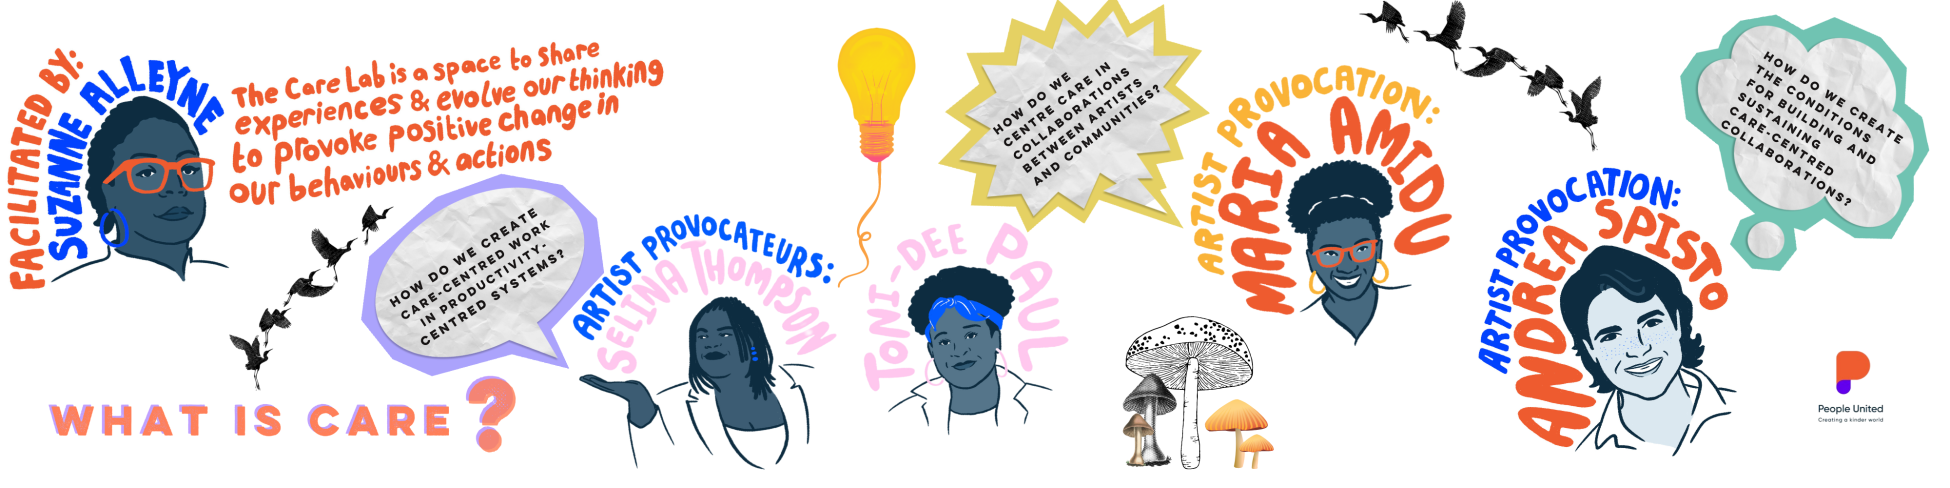 Illustrated visual identity for People United’s first Care Lab showing illustrated portraits of the facilitators and provocateurs as well as written prompts and questions.